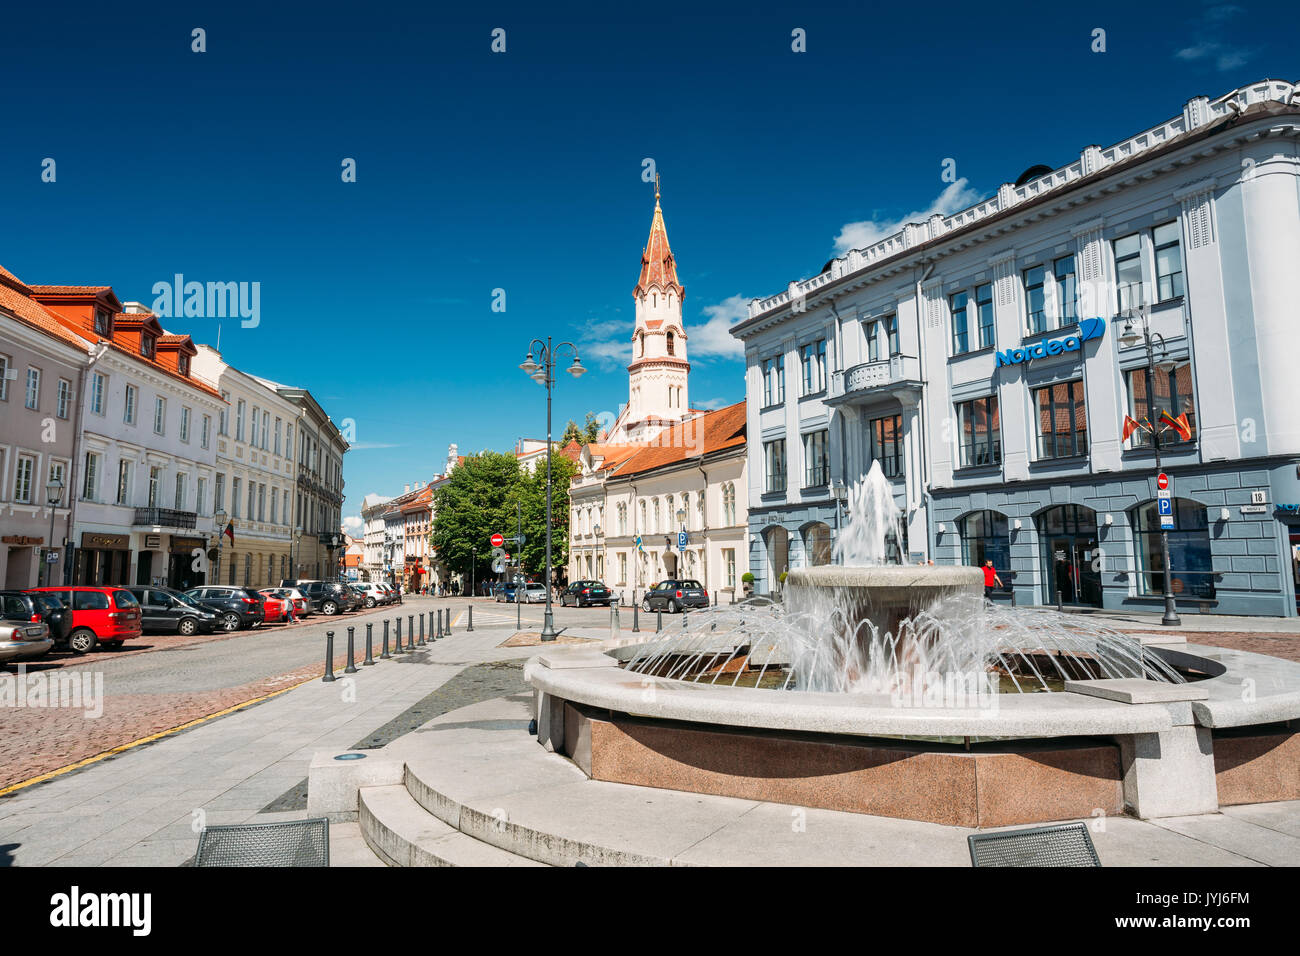 Vilnius, Lithuania - July 5, 2016: Town Hall Square Fountain In Rotuses Square In Old Town. St. Nicholas Church In Sunny Summer Day. Popular Touristic Stock Photo